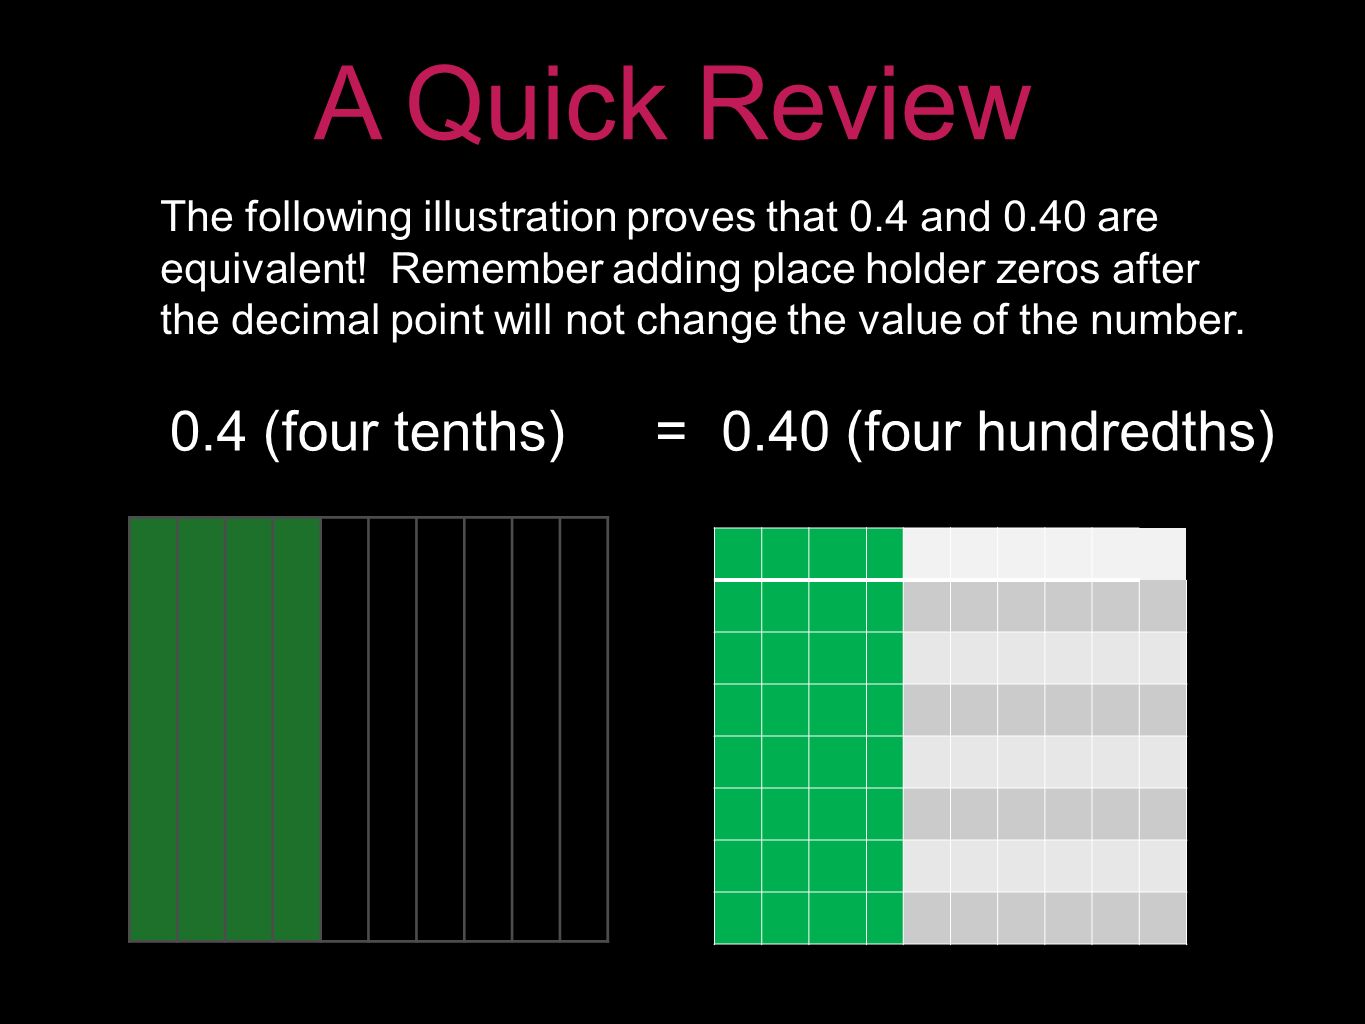 A Quick Review The following illustration proves that 0.4 and 0.40 are equivalent.